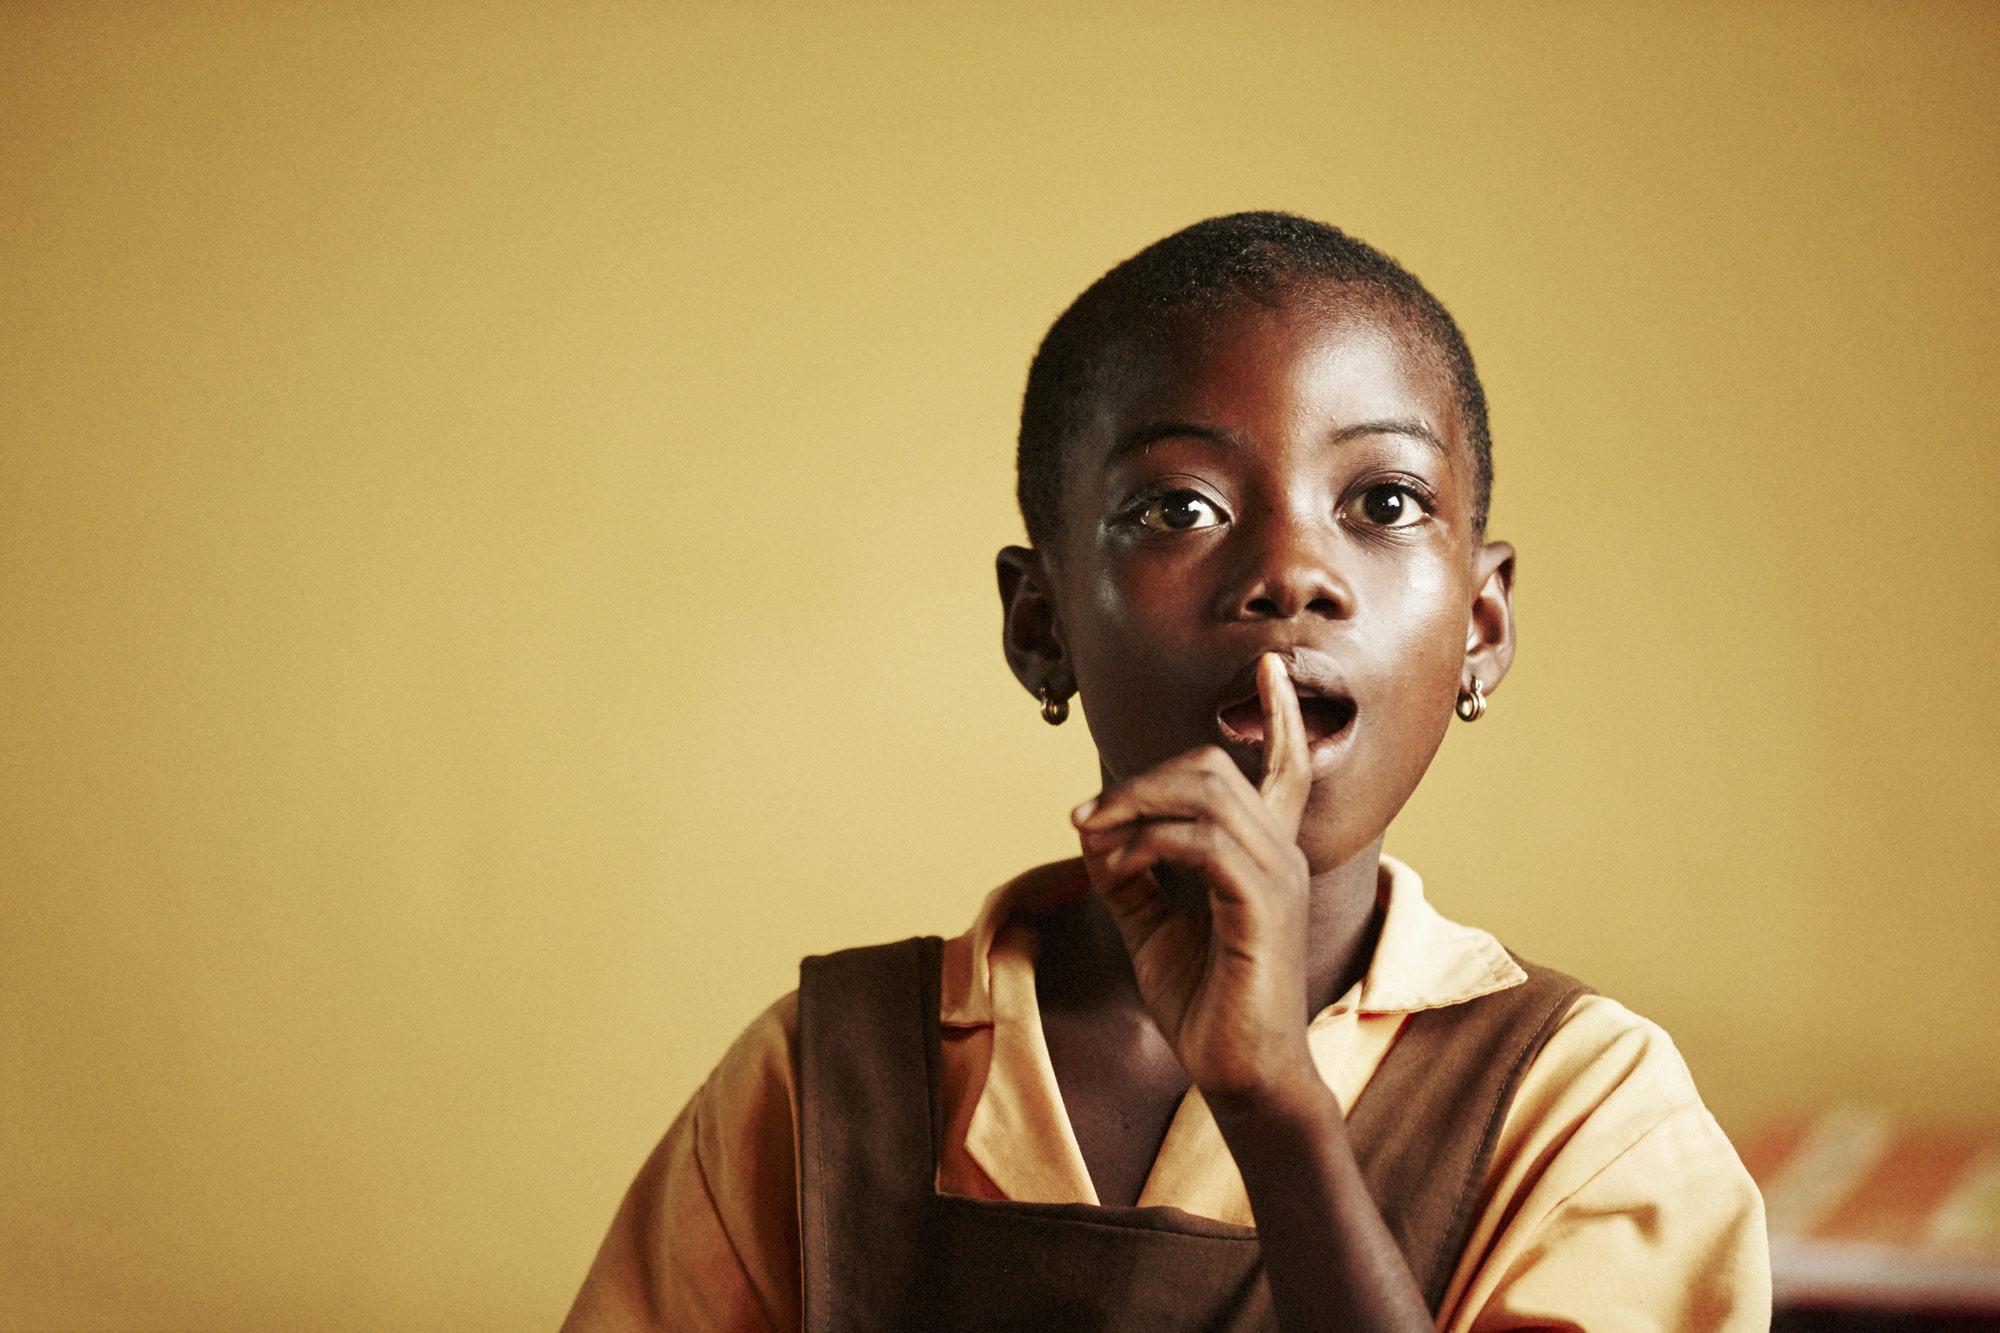 Young girl from Ghana in classroom